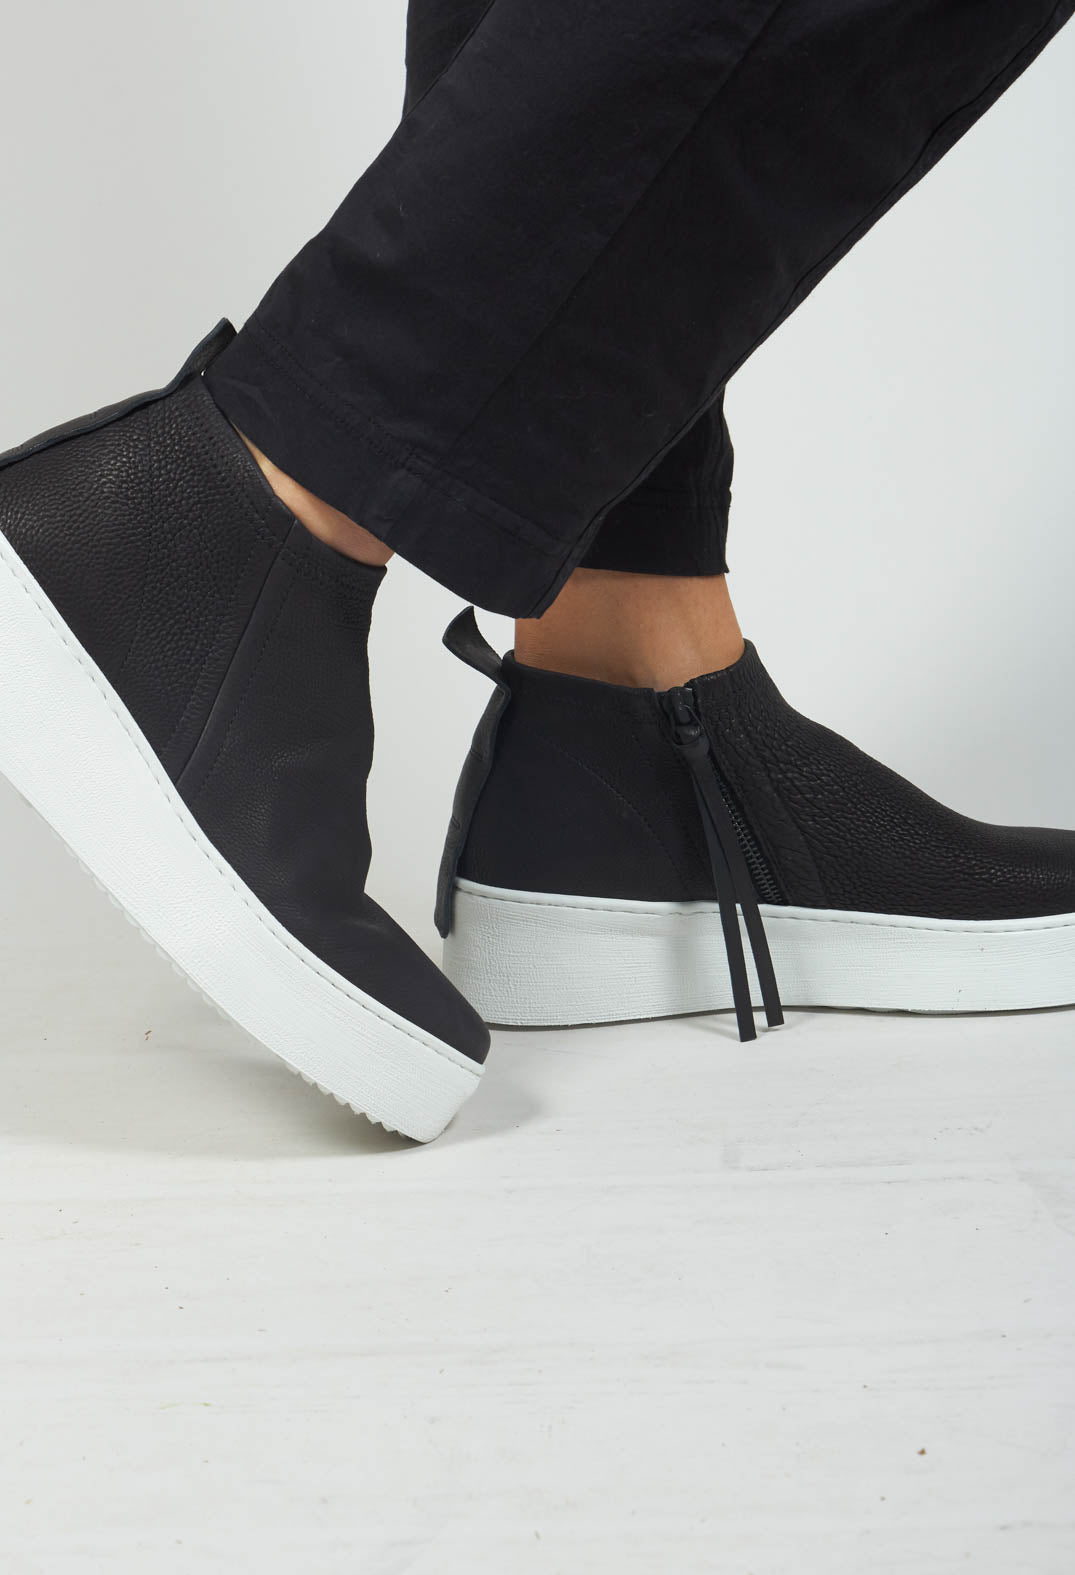 Zip Up Chunky Shoe in Black and White